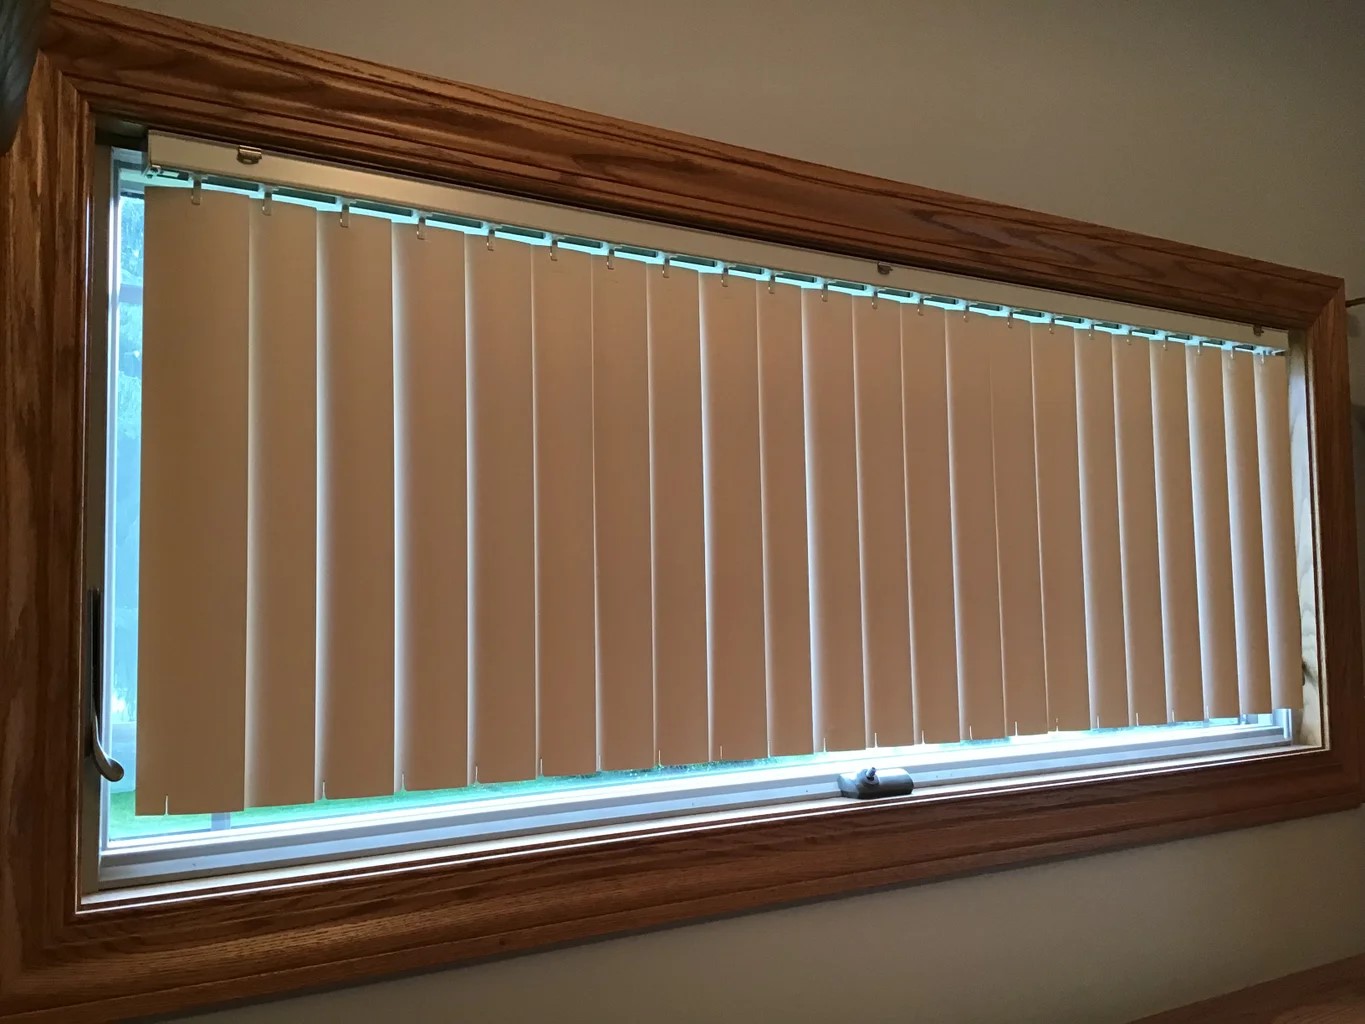 How To Cut Vertical Blinds